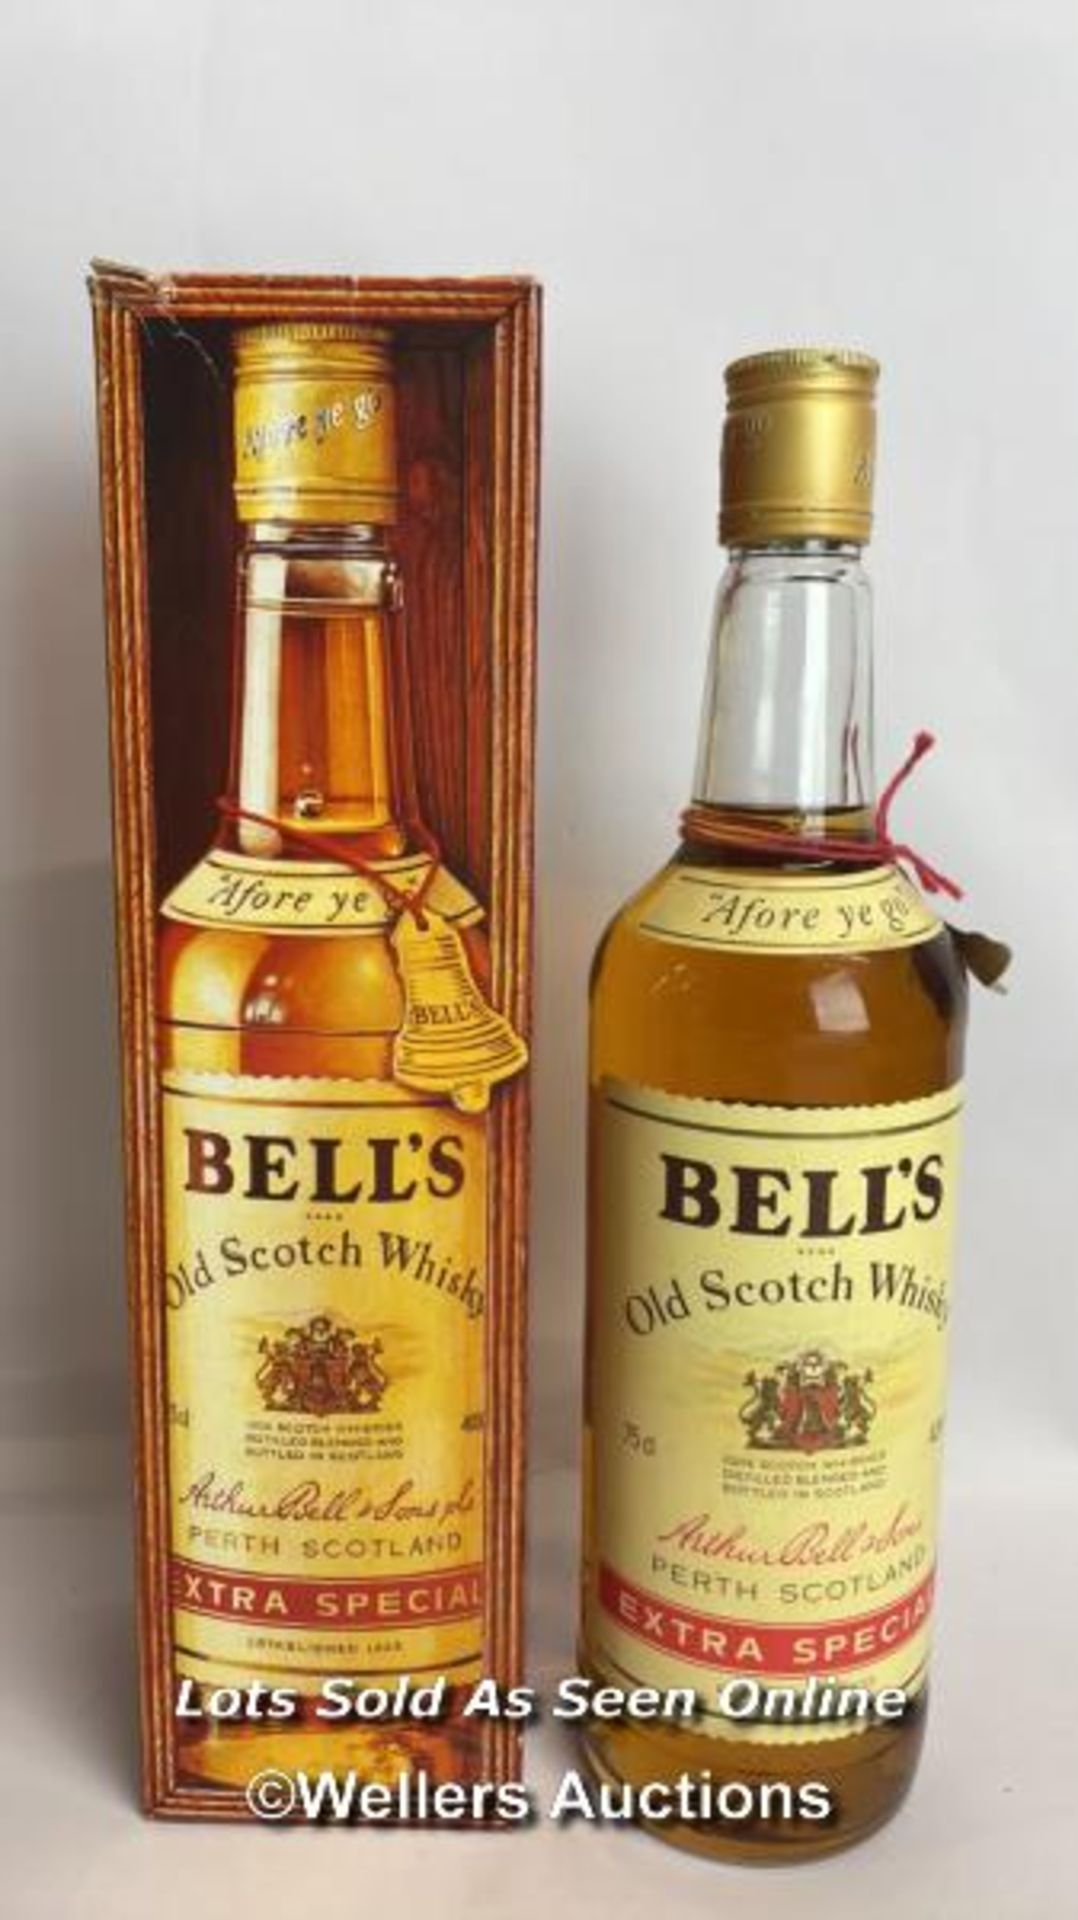 Bell's Extra Special Old Scotch Whisky, "Afore Ye Go", 75cl, 43% vol, In original box / Please see